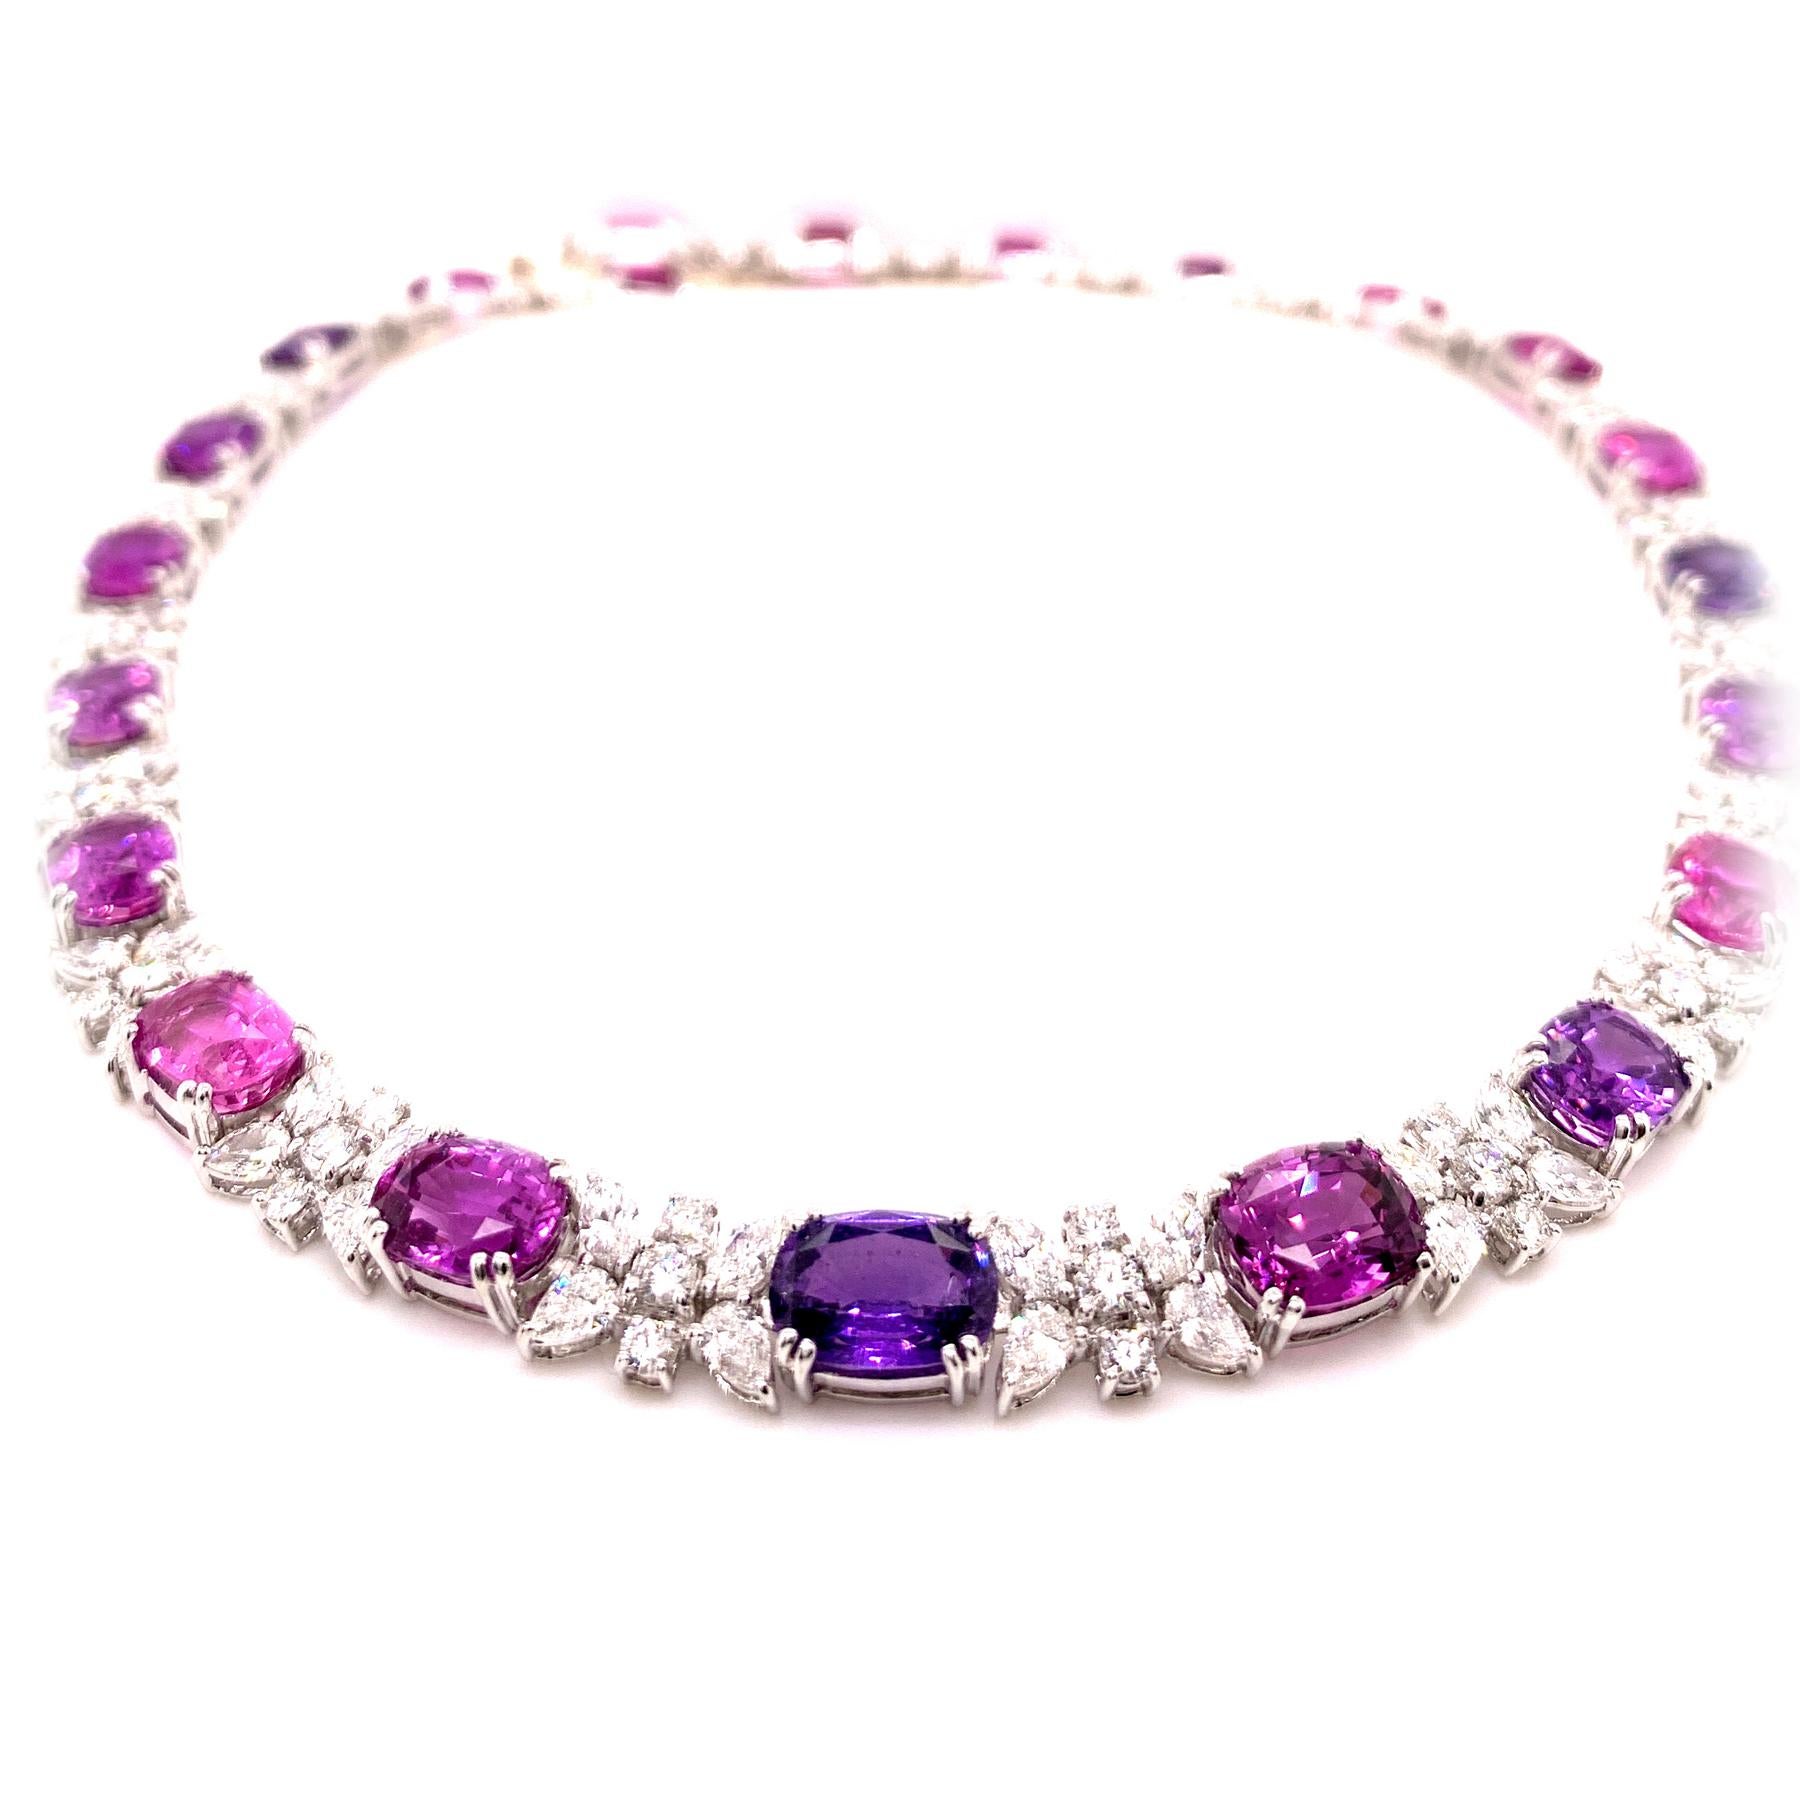 Rare no heat purple sapphire diamond necklace. Sri Lanka origin, Intense purple, pink, violet, no heat, high luster, oval faceted, 50.30 carats, natural sapphires mounted in open basket with four prongs, accented with round and marquise brilliant